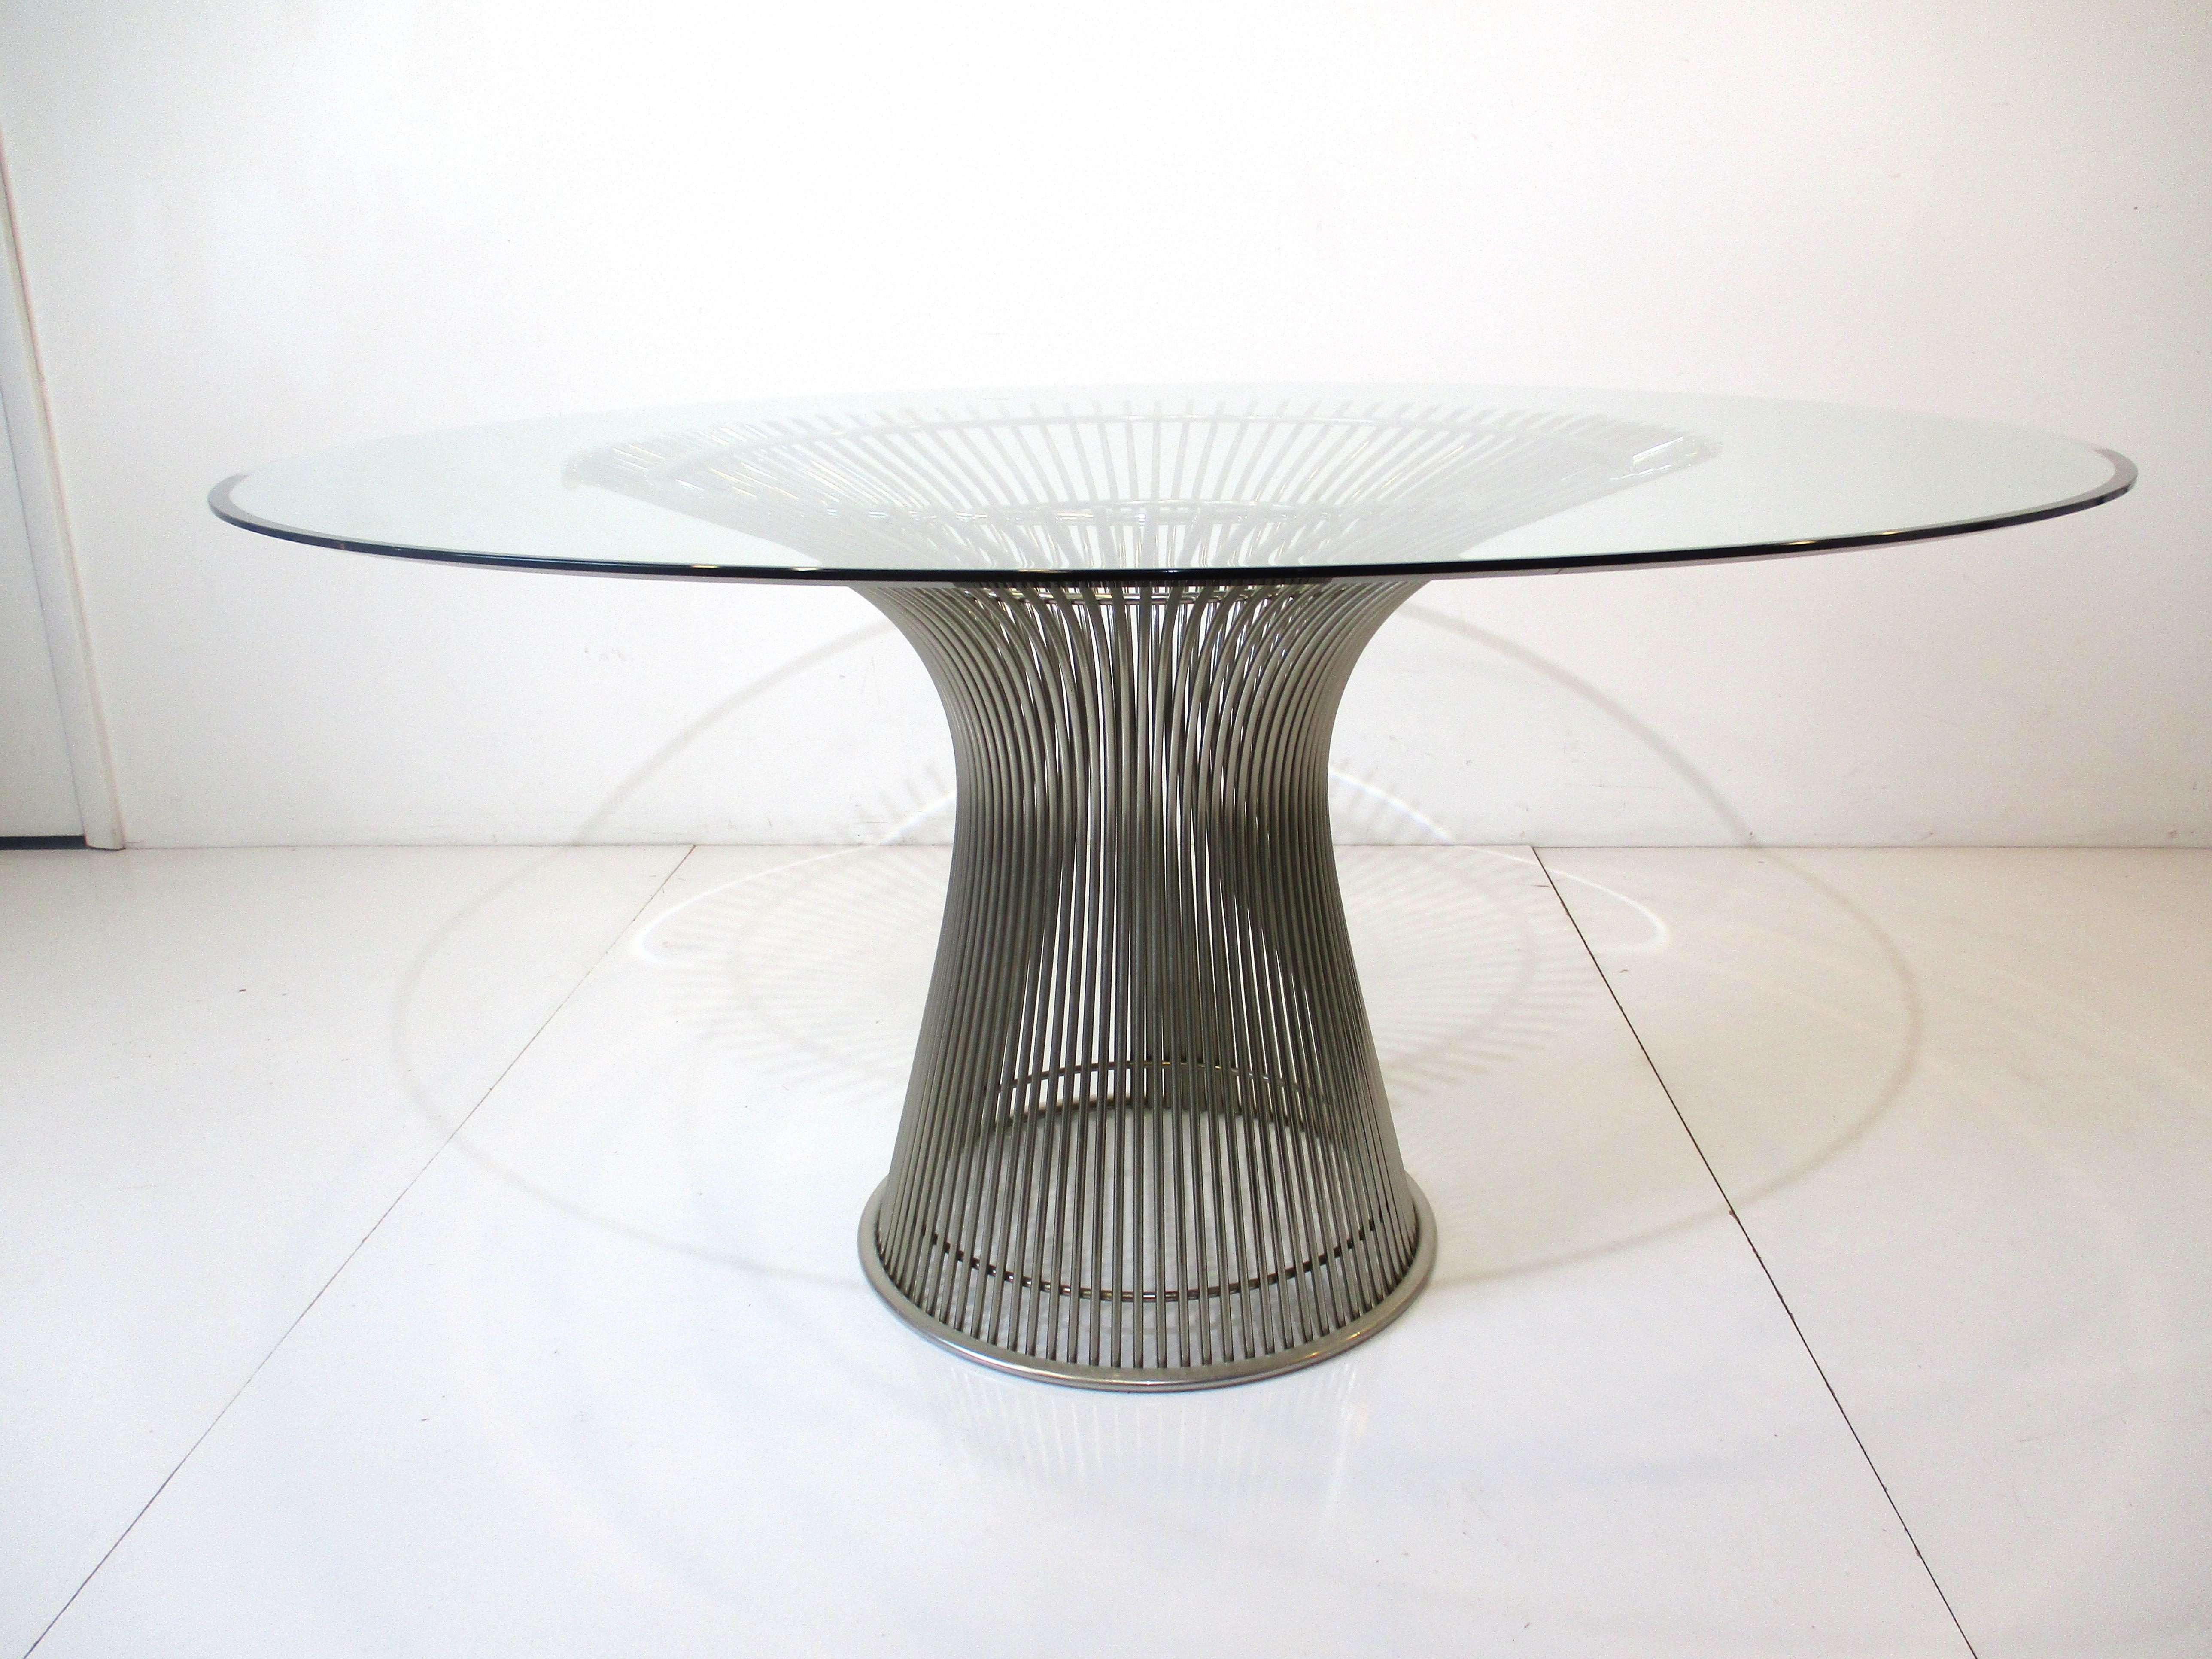 A very well crafted polished nickel plated welded vertical steel wire rod dining table with thick temped fine beveled edged glass top. Manufactured by Knoll International this vintage table has a clear plastic extrusion ring to it's base to protect